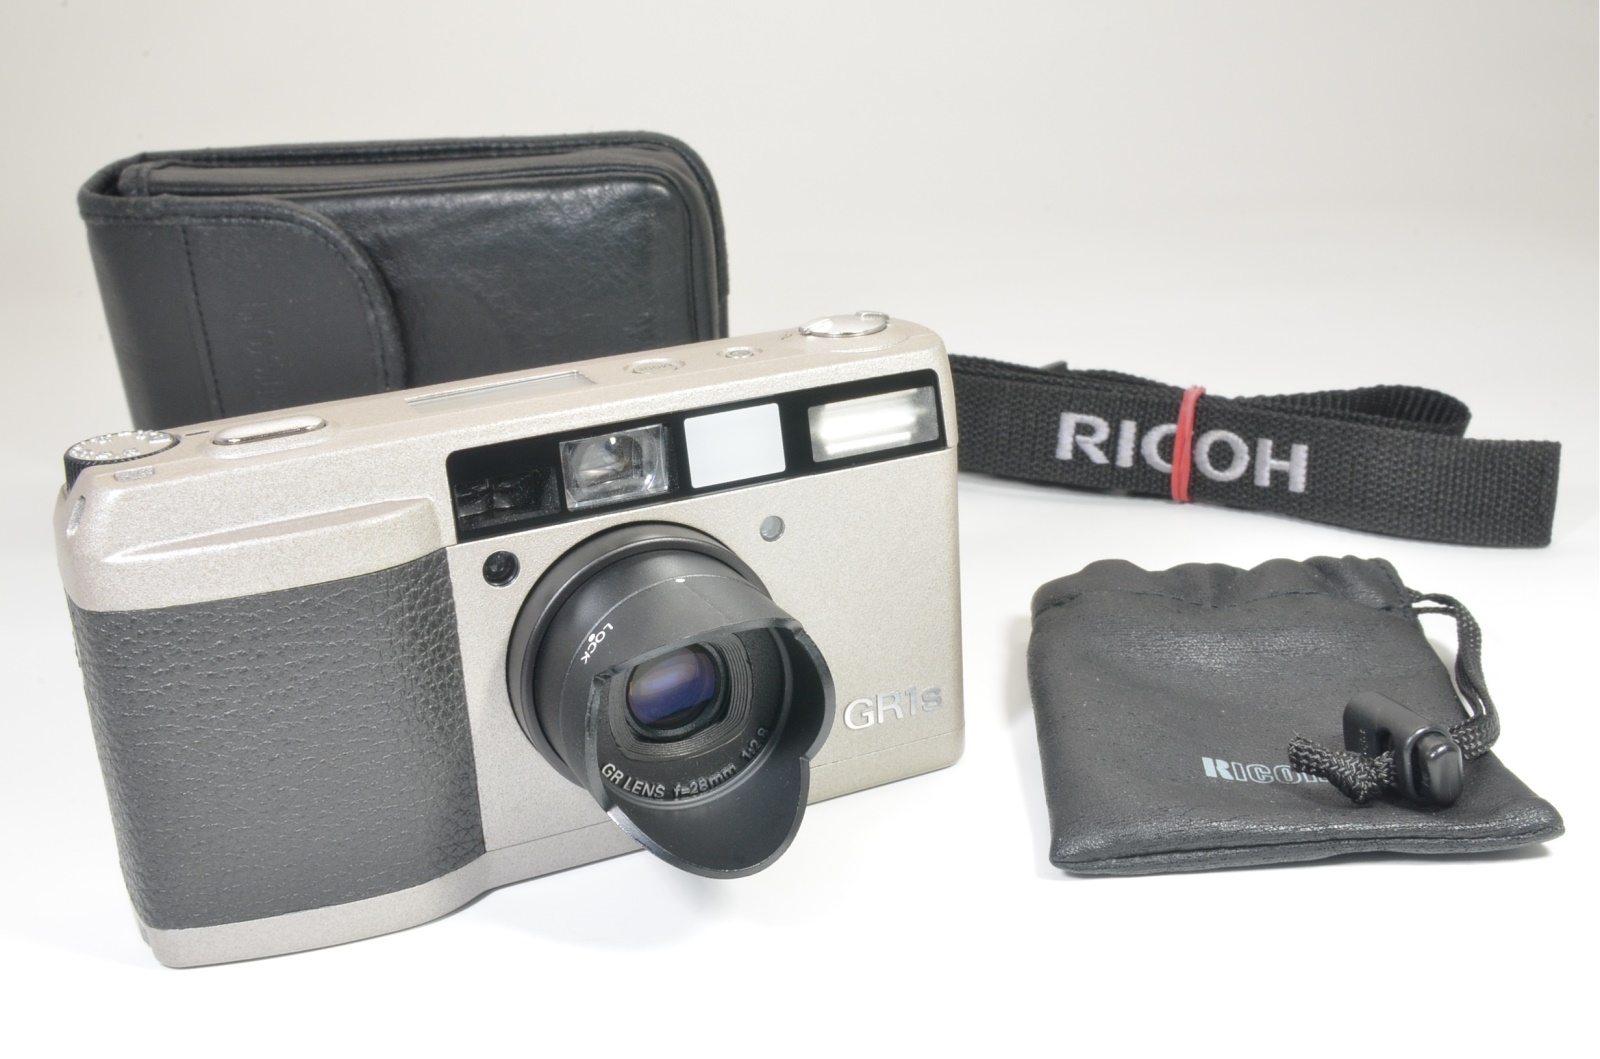 RICOH GR1s Date Silver mm f2.8 P&S film camera from Japan